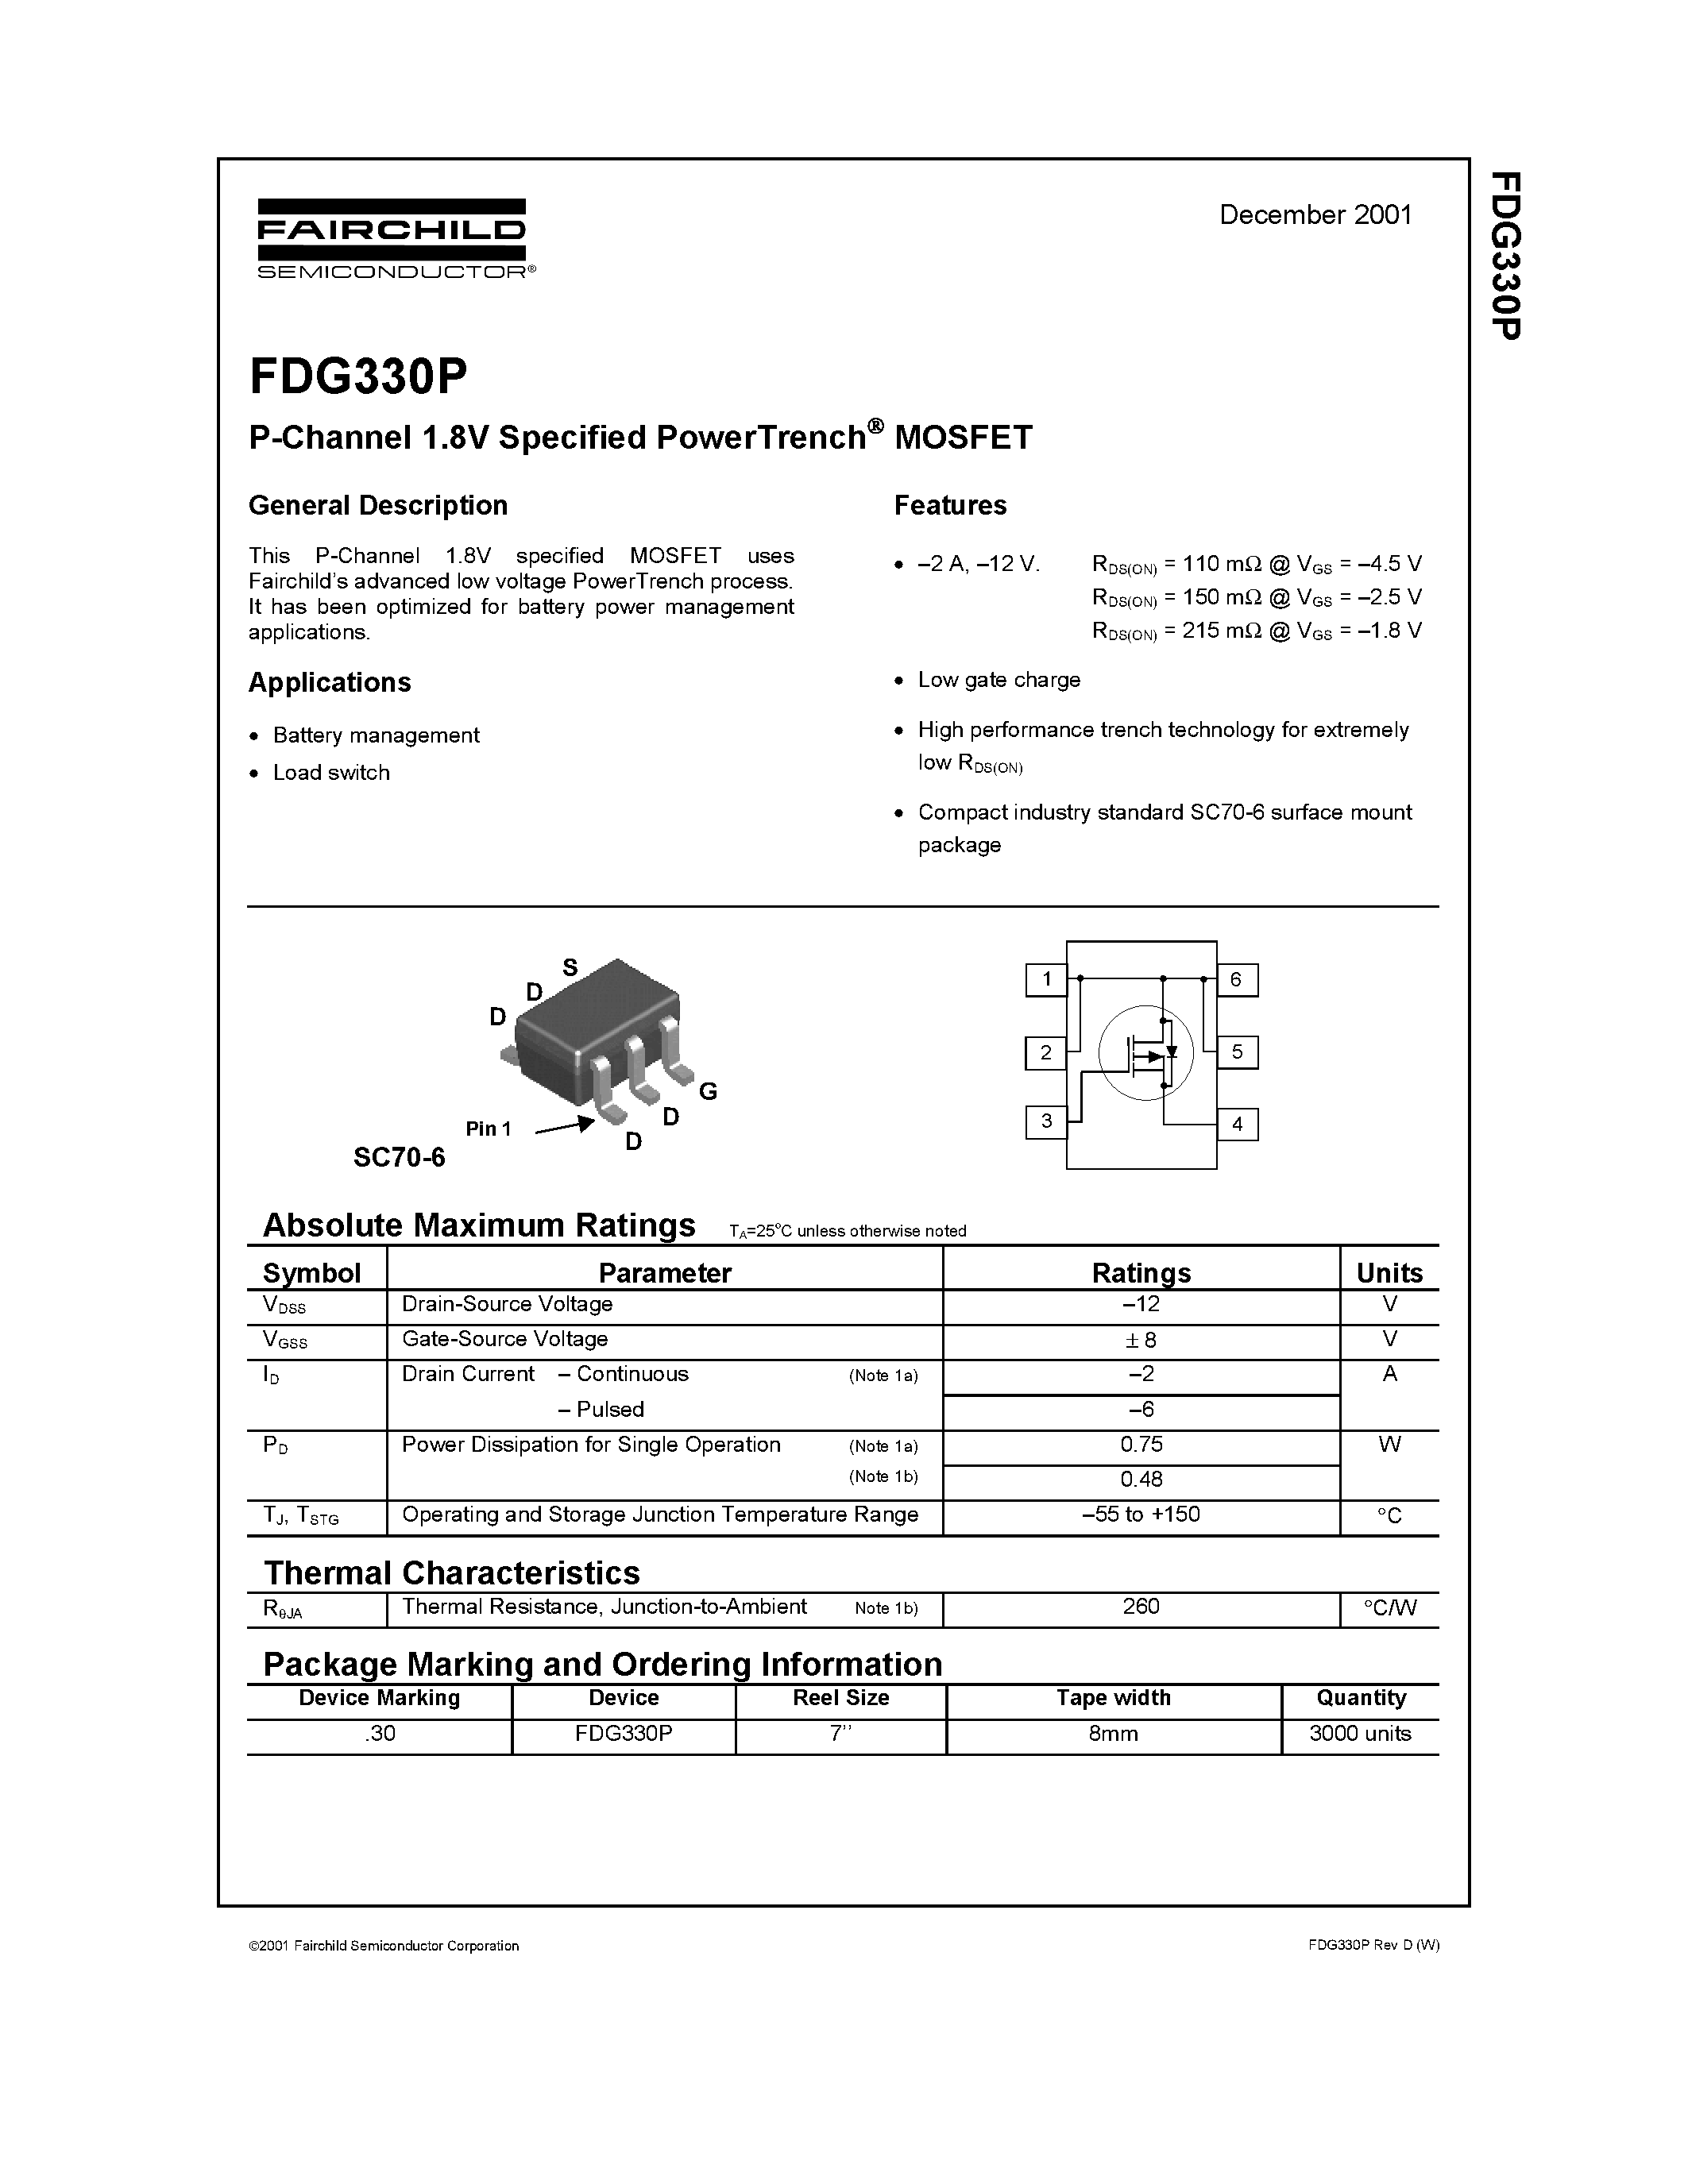 Datasheet FDG330P - P-Channel 1.8V Specified PowerTrench MOSFET page 1